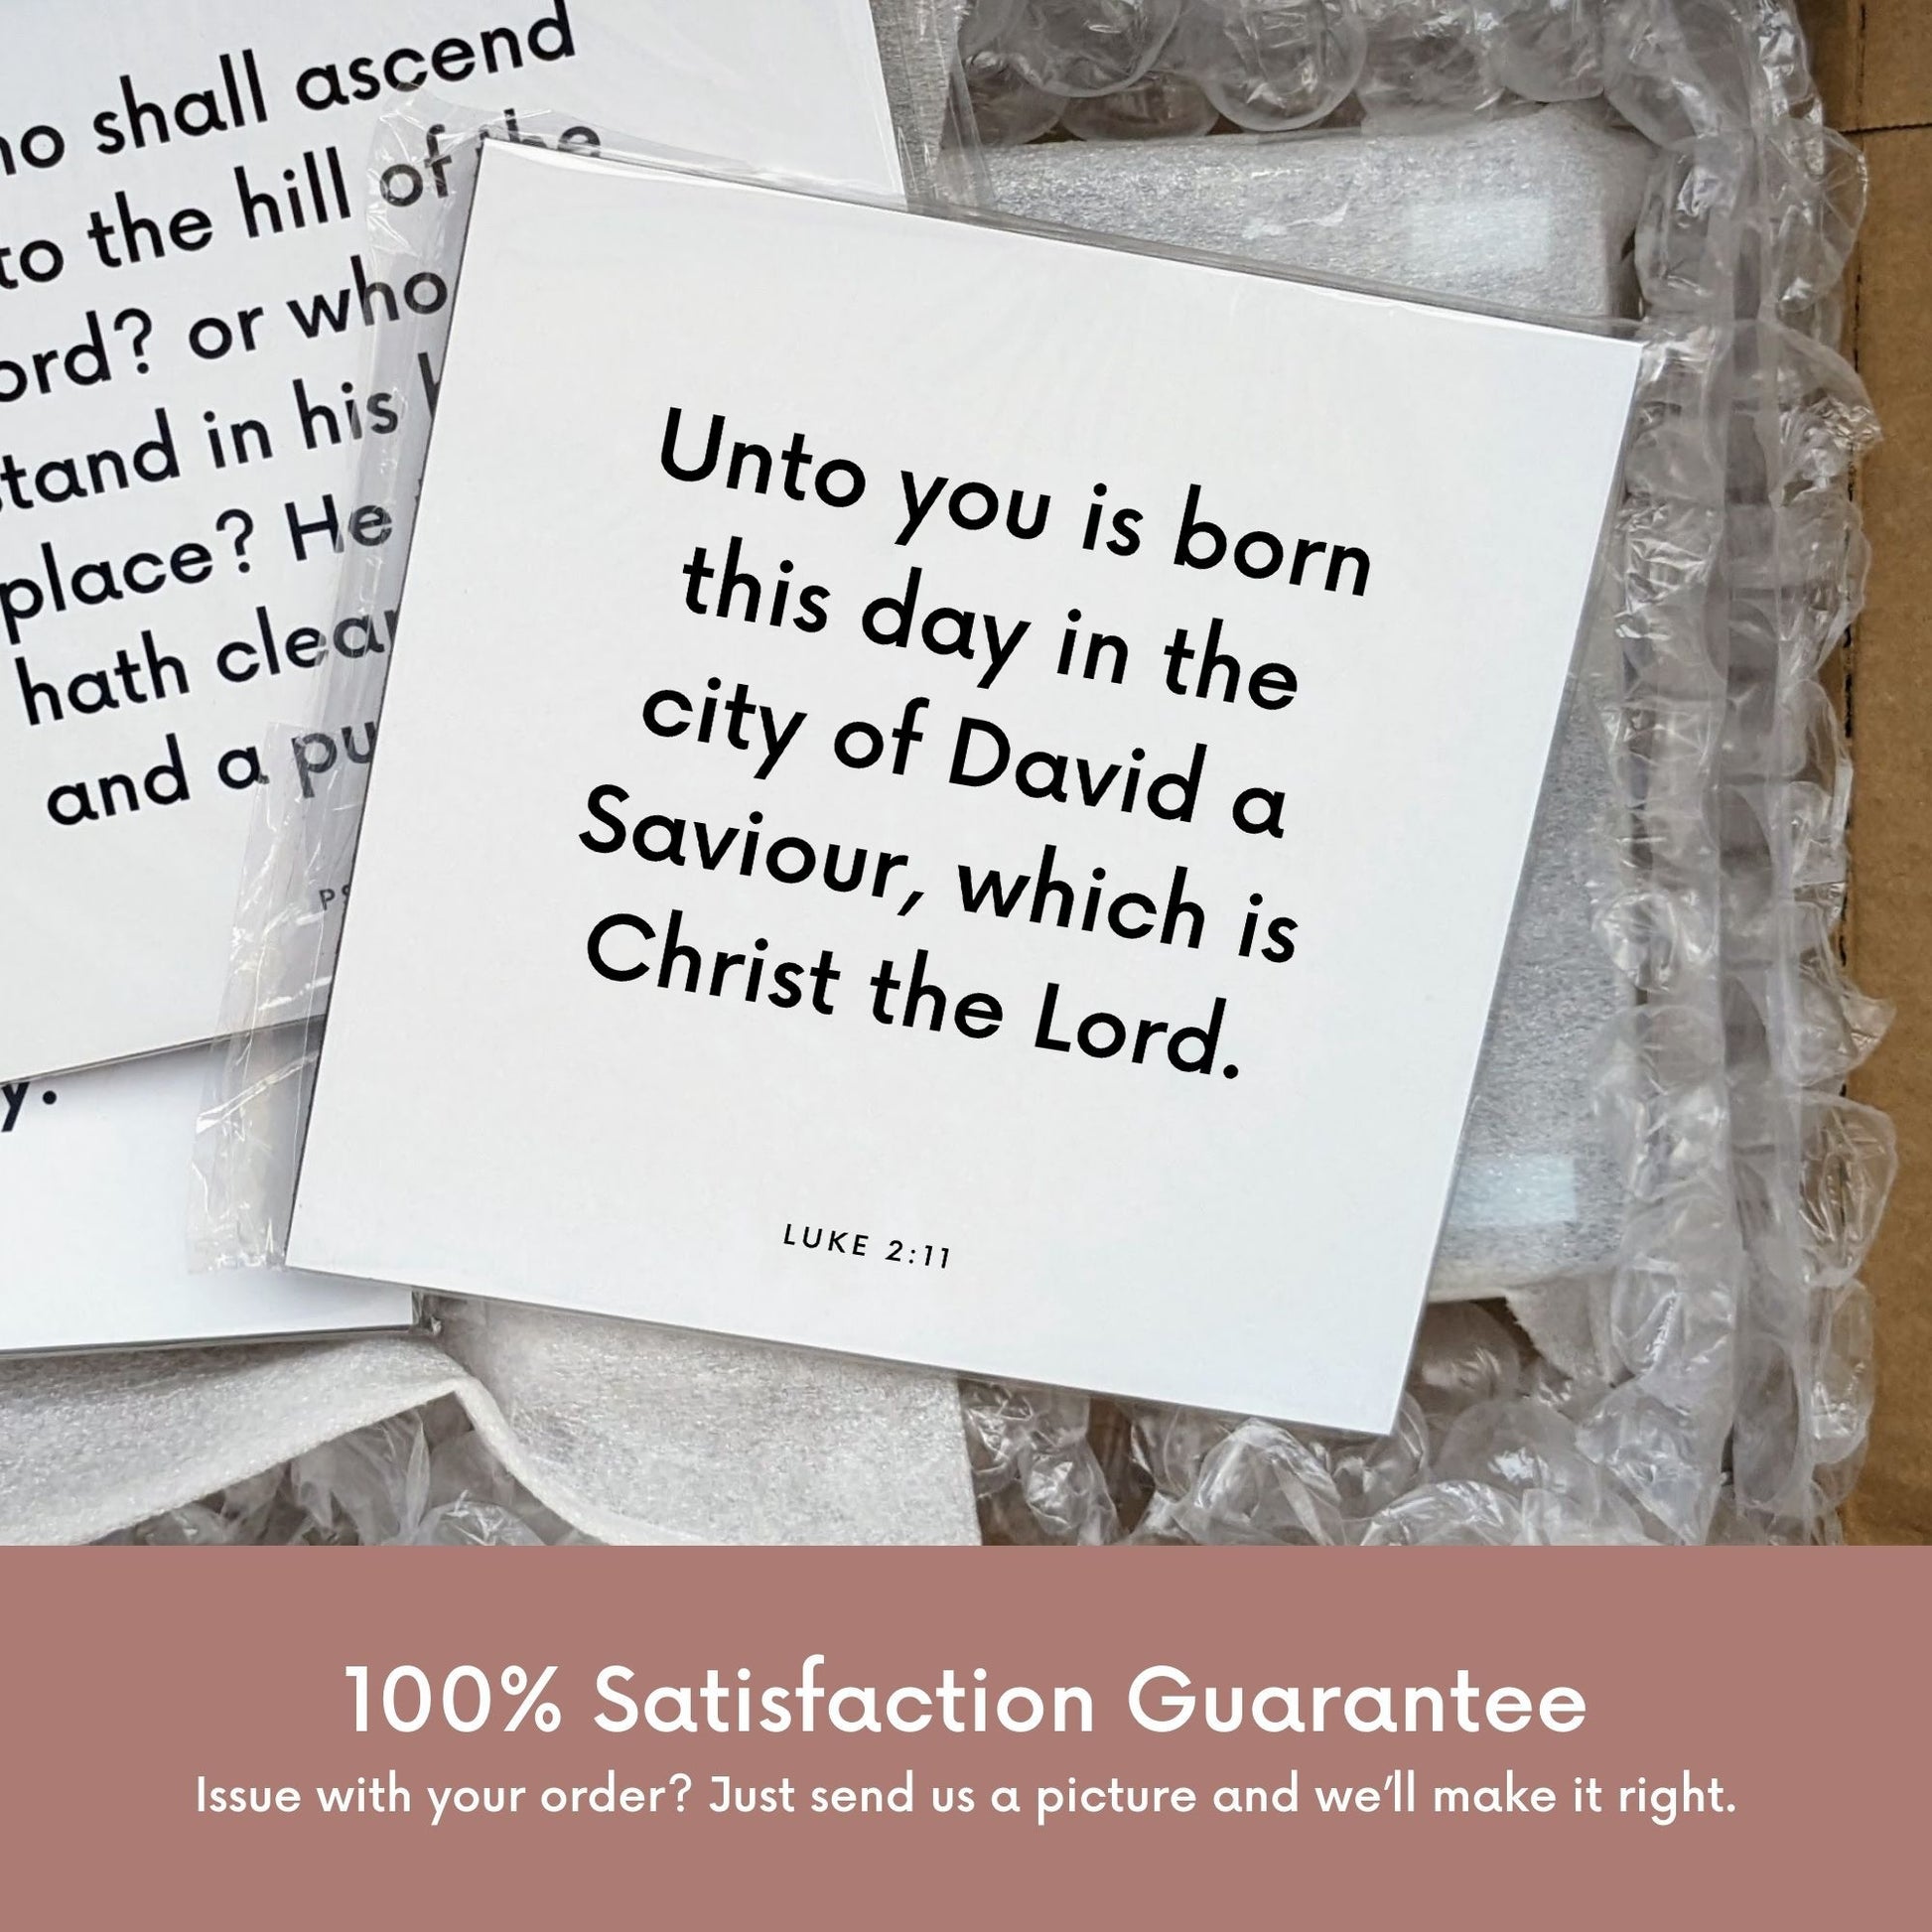 Shipping materials for scripture tile of Luke 2:11 - "Unto you is born this day in the city of David a Saviour"